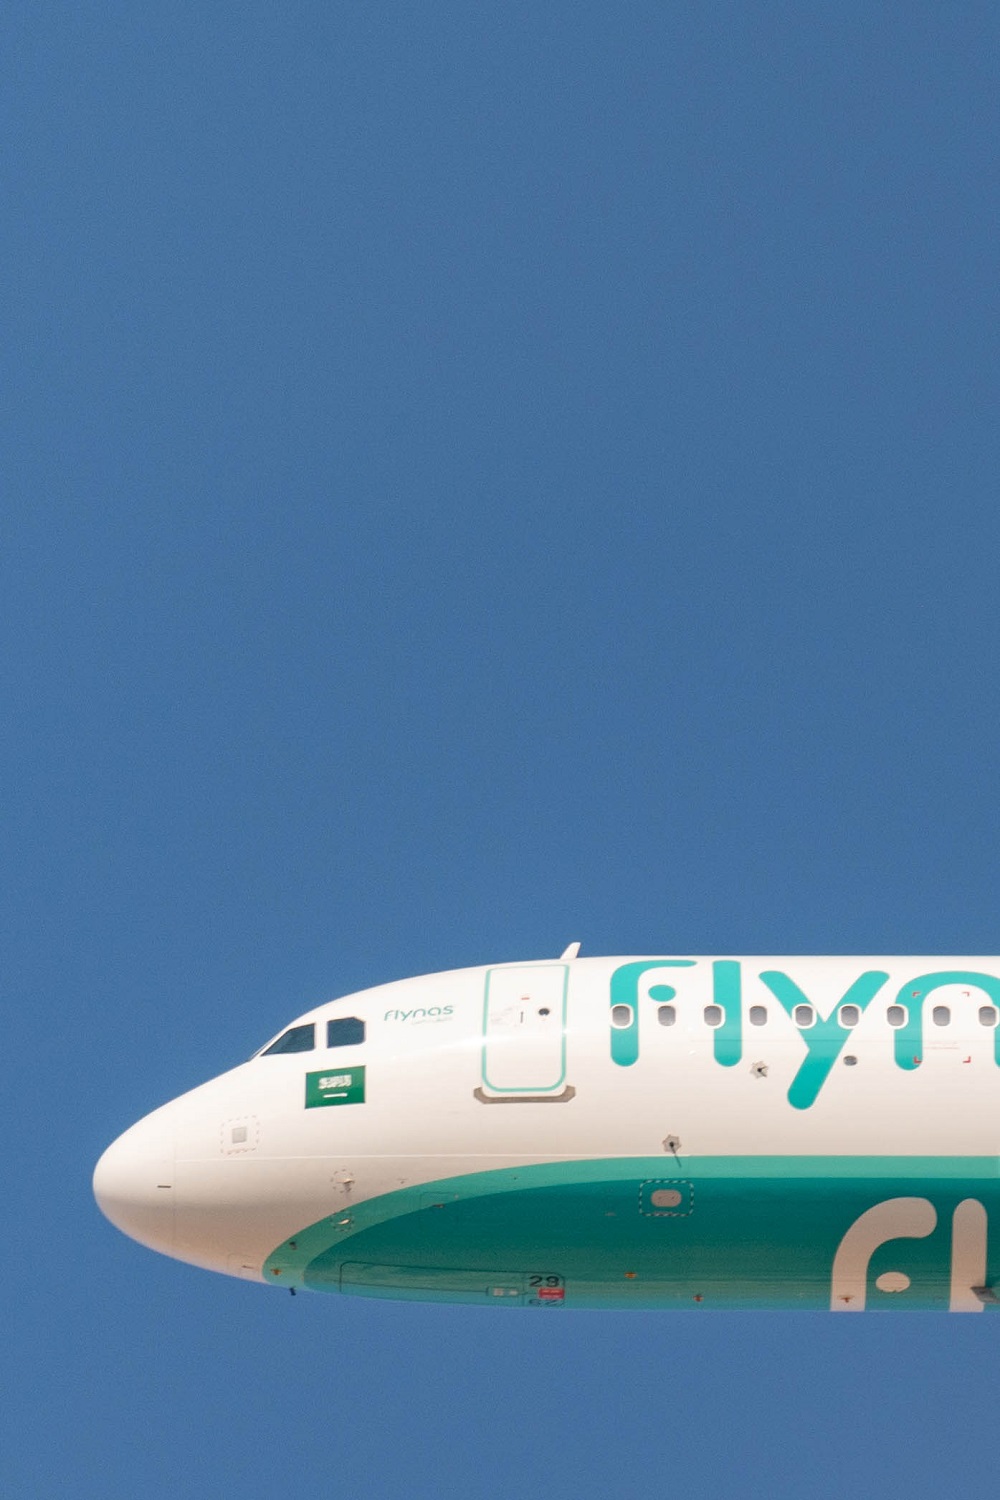 flynas plane in the air.